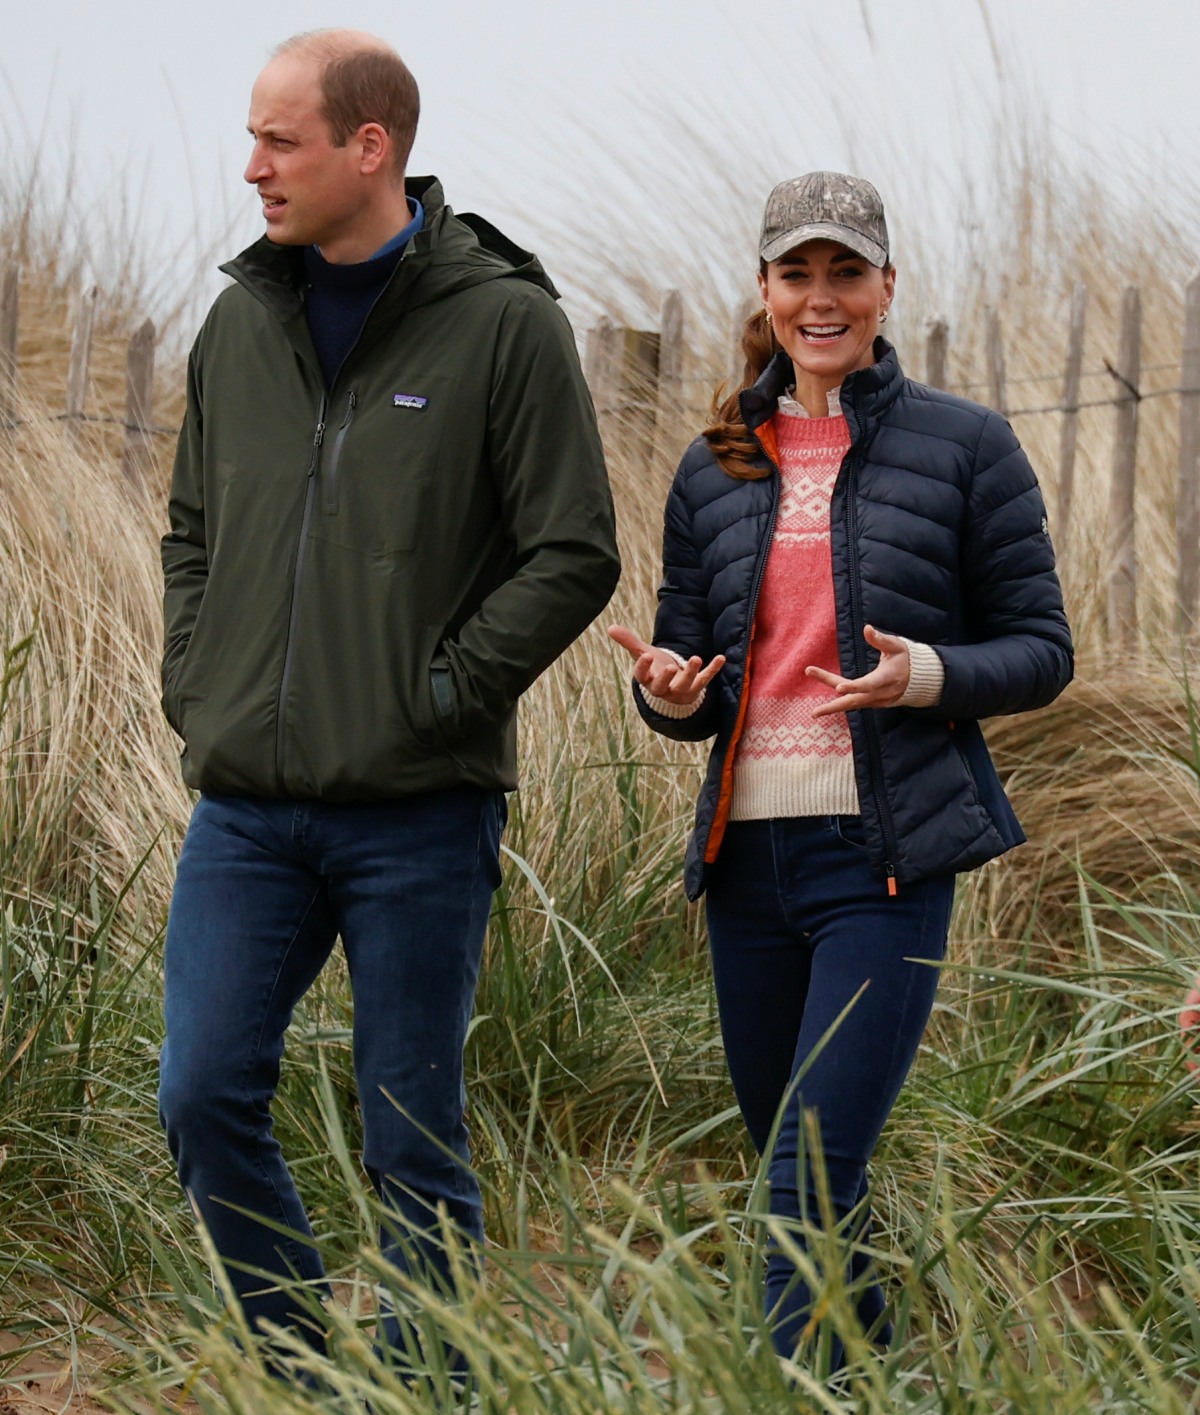 Britain's Prince William and Catherine, Duchess of Cambridge try land yachting at St Andrews